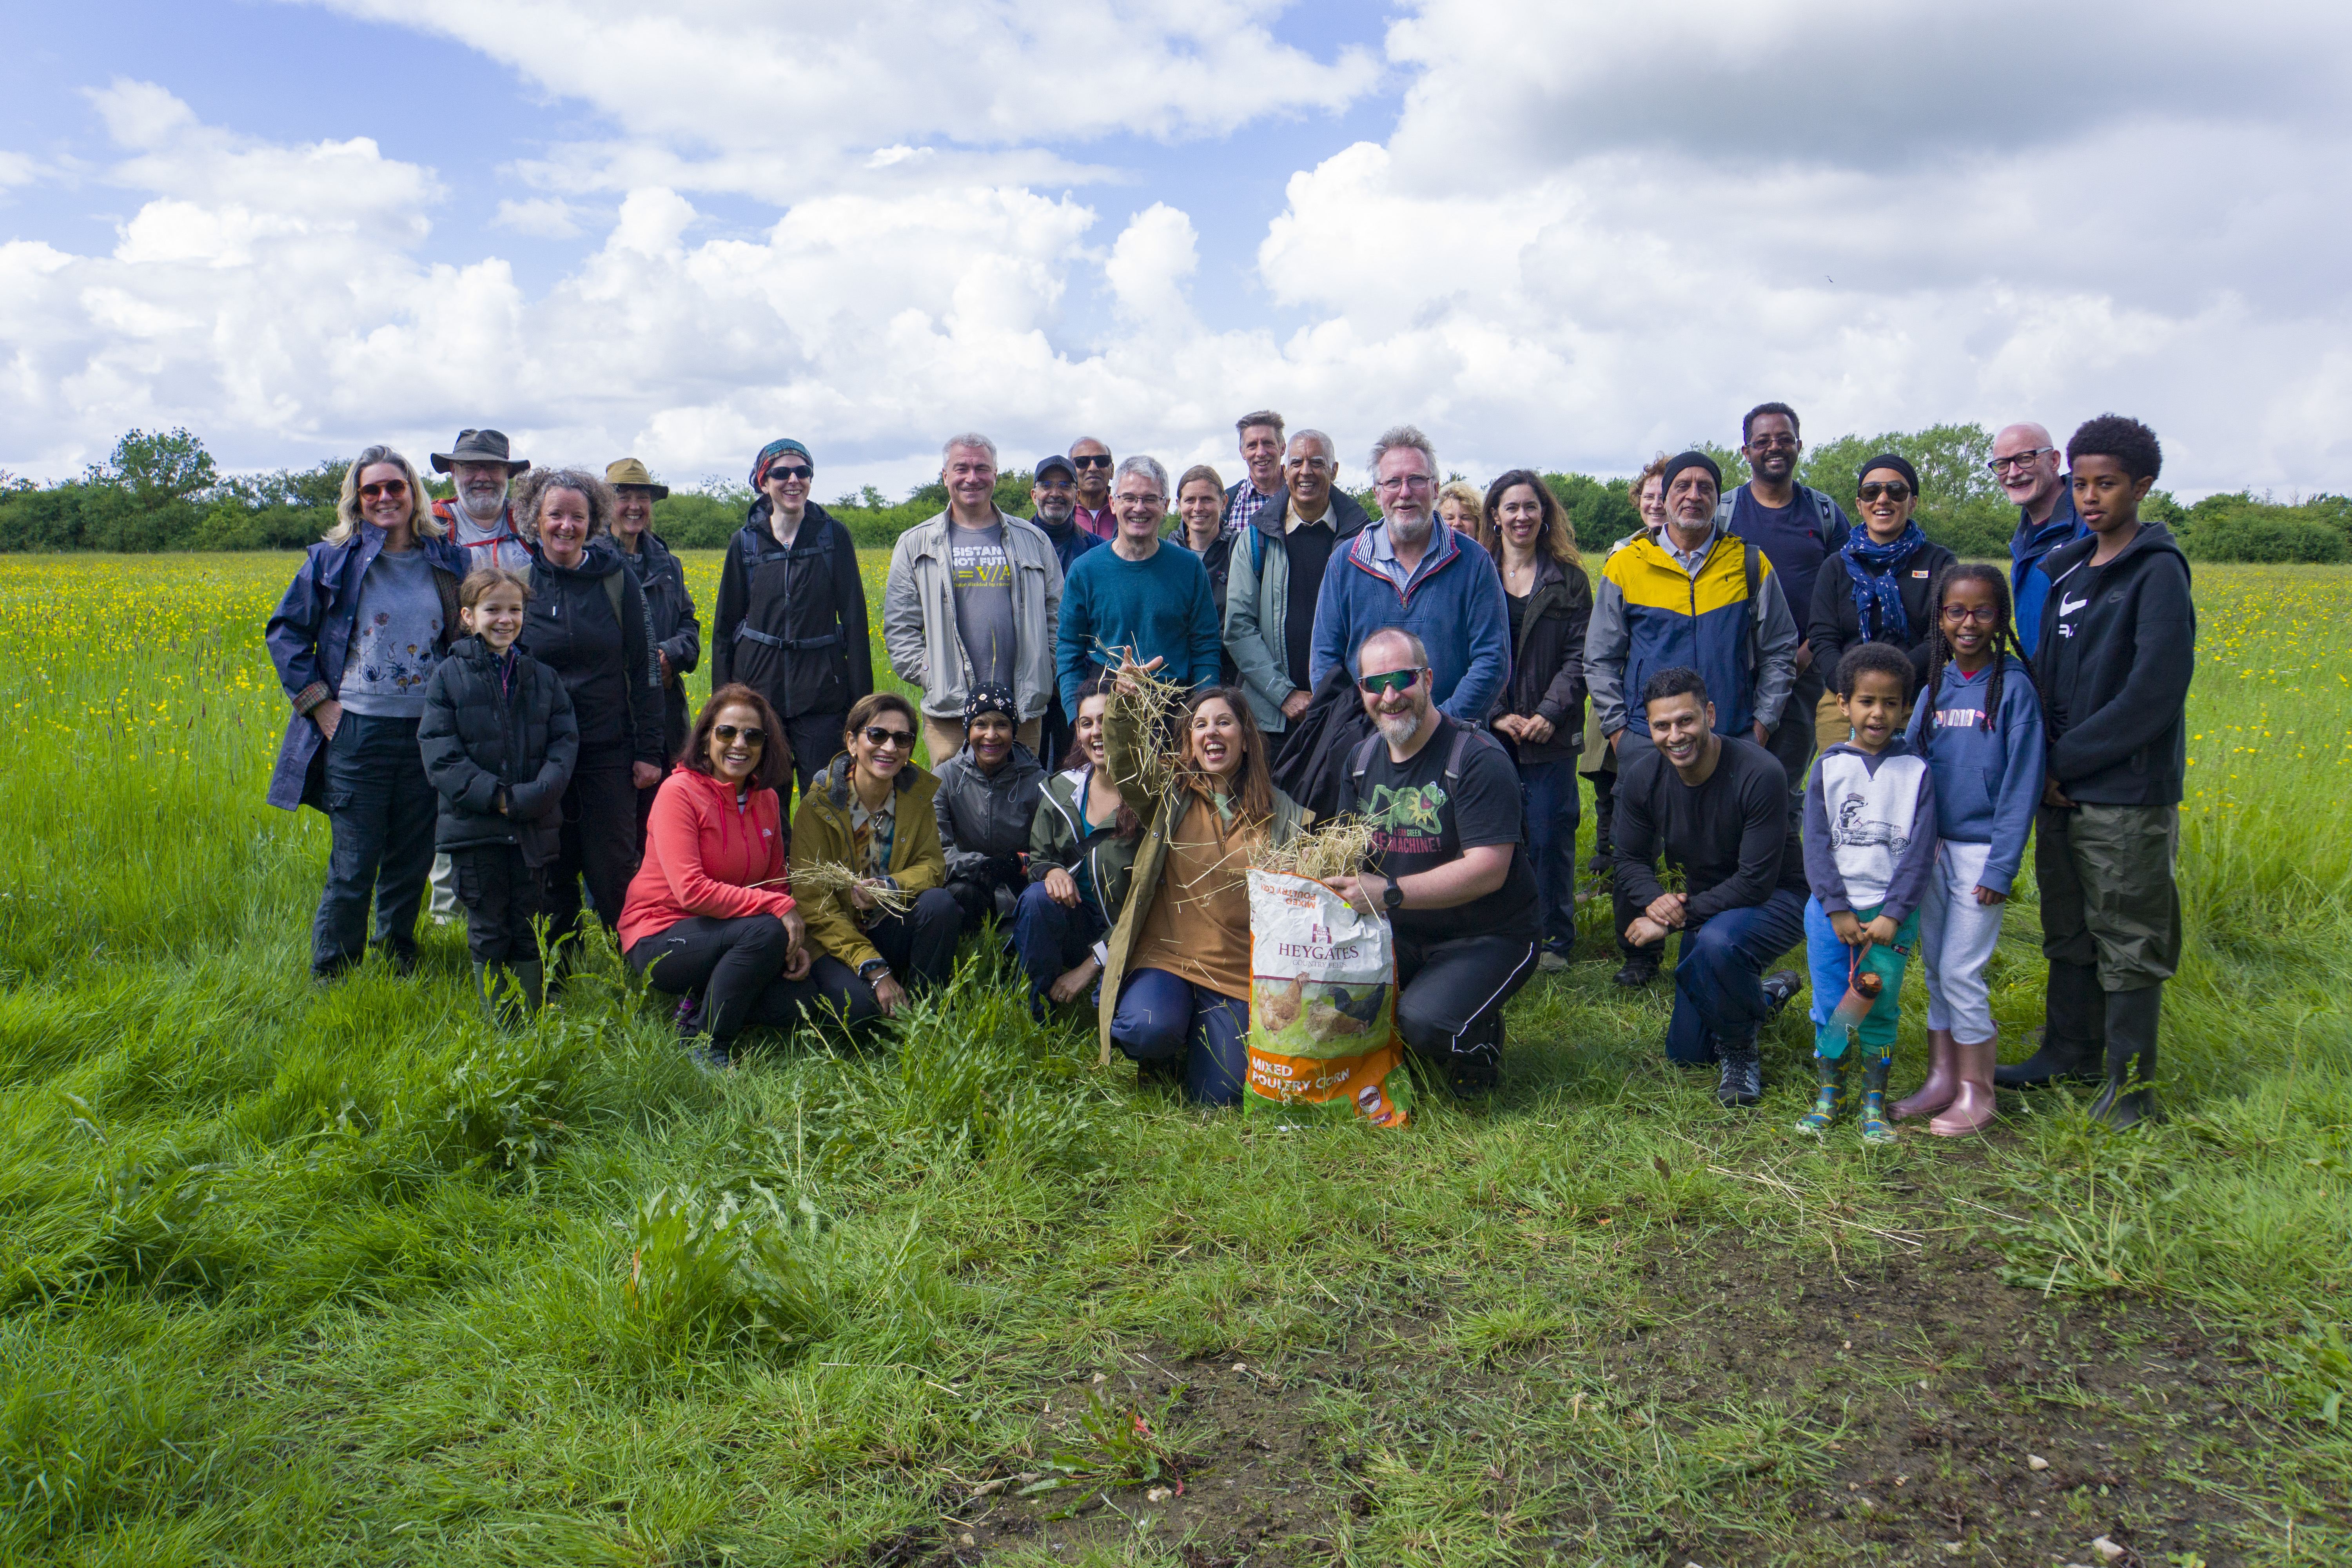 Group photo of event participants standing in a meadow. Image credit: Sivi Sivanesan